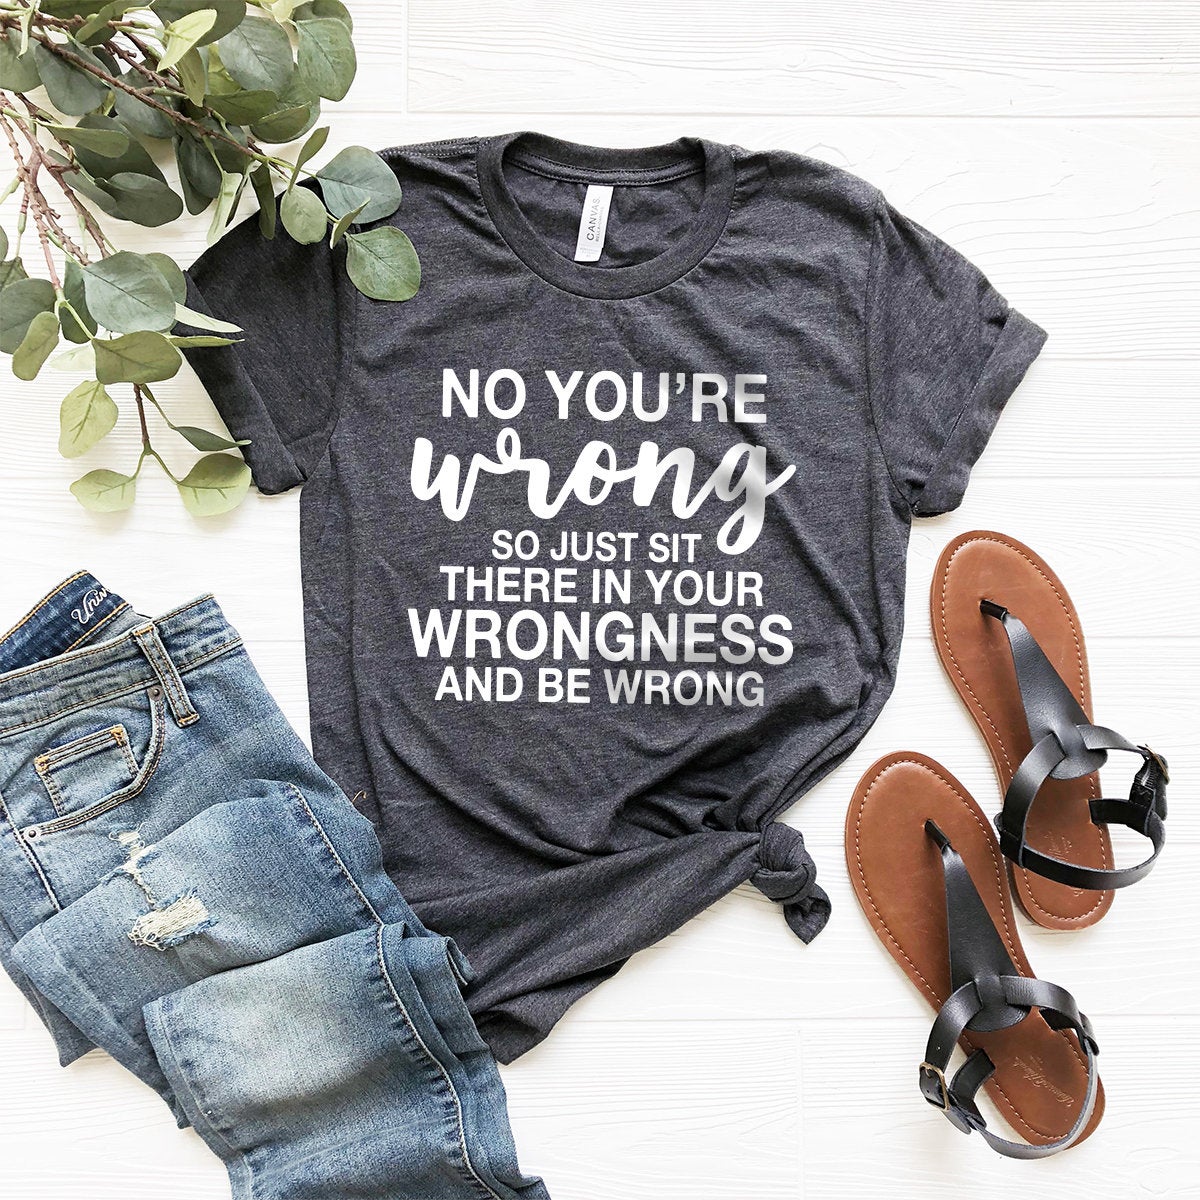 Funny Sarcastic Shirt, Mom Shirt, Women Birthday Gift, Sarcasm T-Shirt, Funny Quote Shirt, My Patience Tested I'm Negative Shirt, Sassy Tee - Fastdeliverytees.com